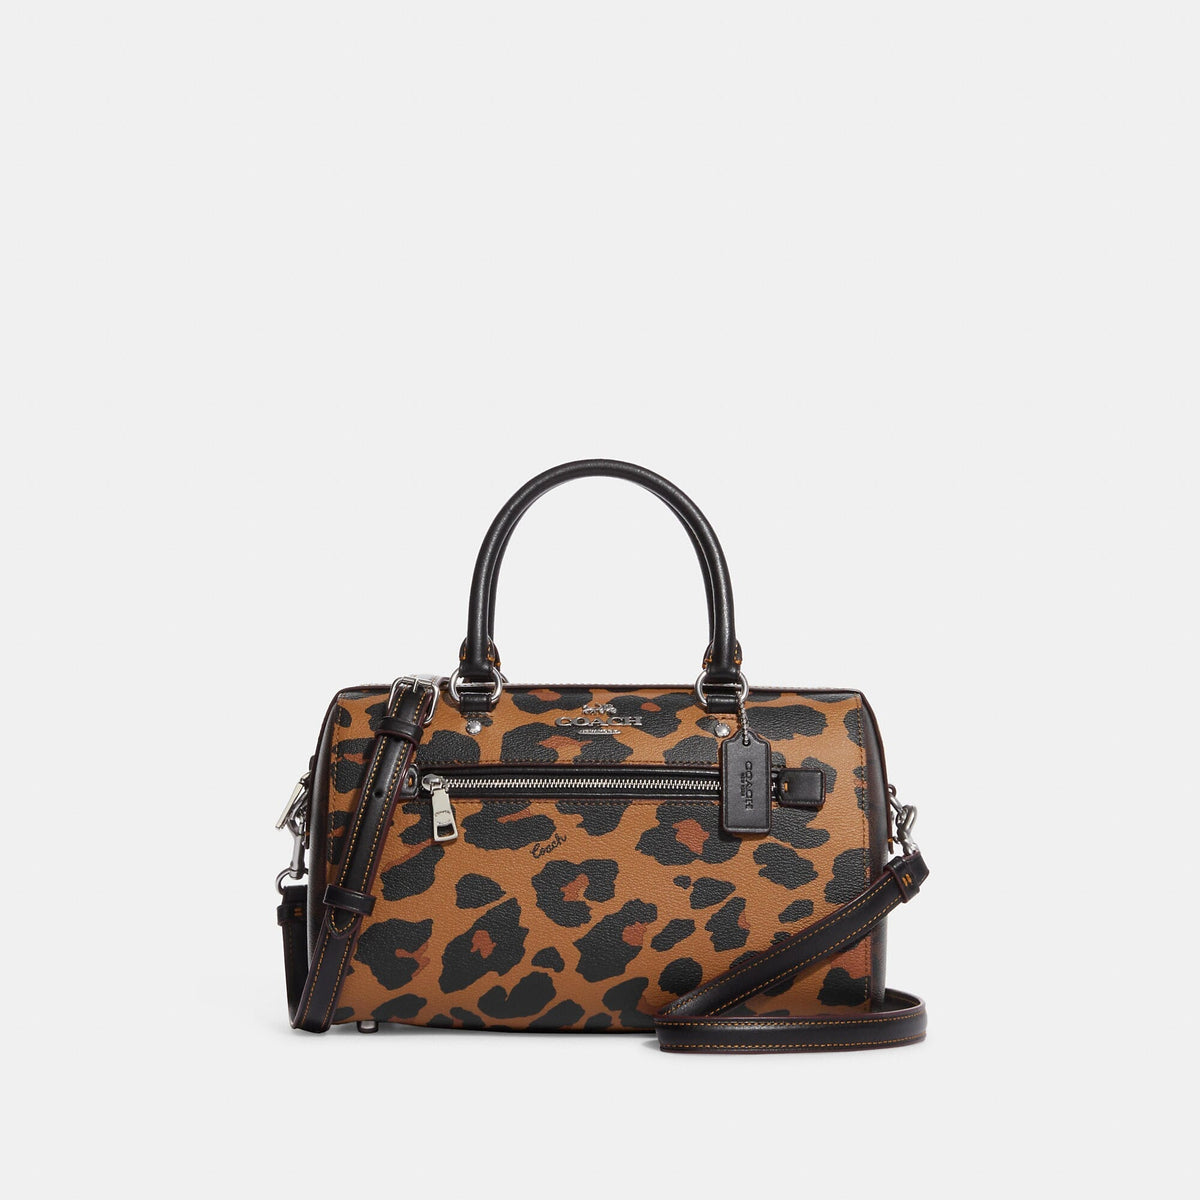 Coach Outlet Rowan Satchel In Signature Canvas With Leopard Print - TJ Outlet